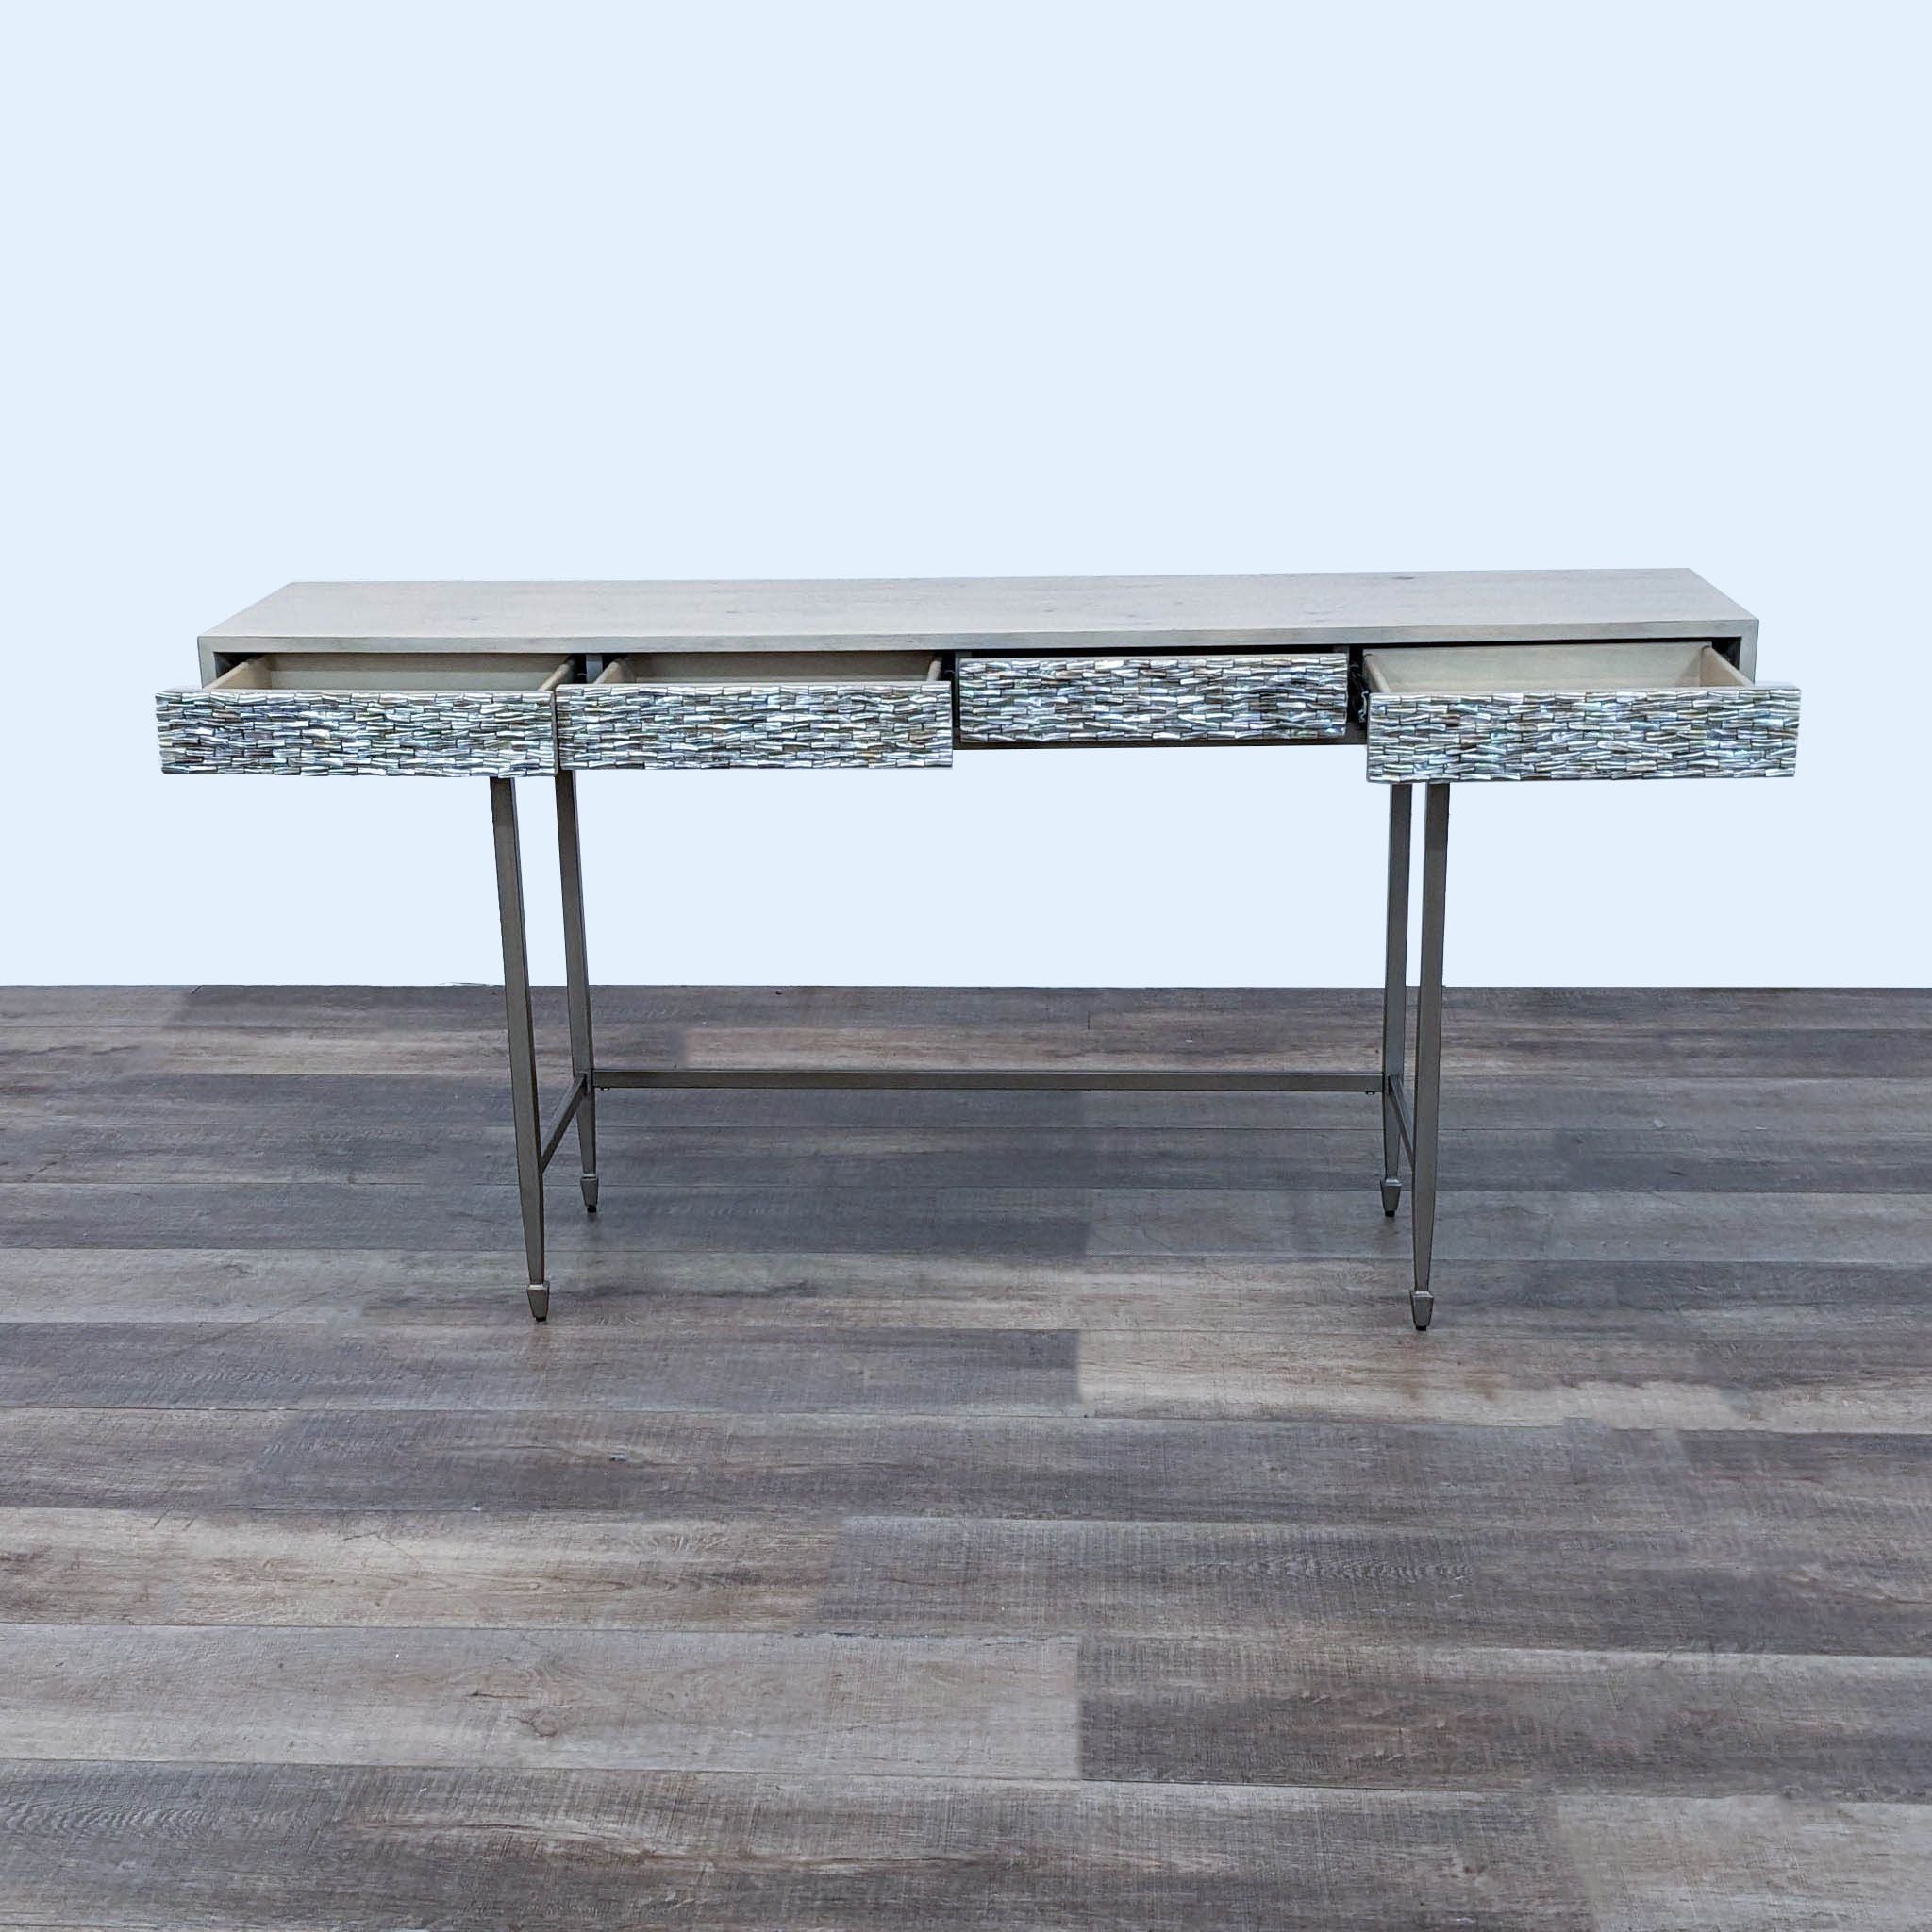 Caracole wood console with open metallic textured drawers revealing storage, on a metal frame against a wooden floor.